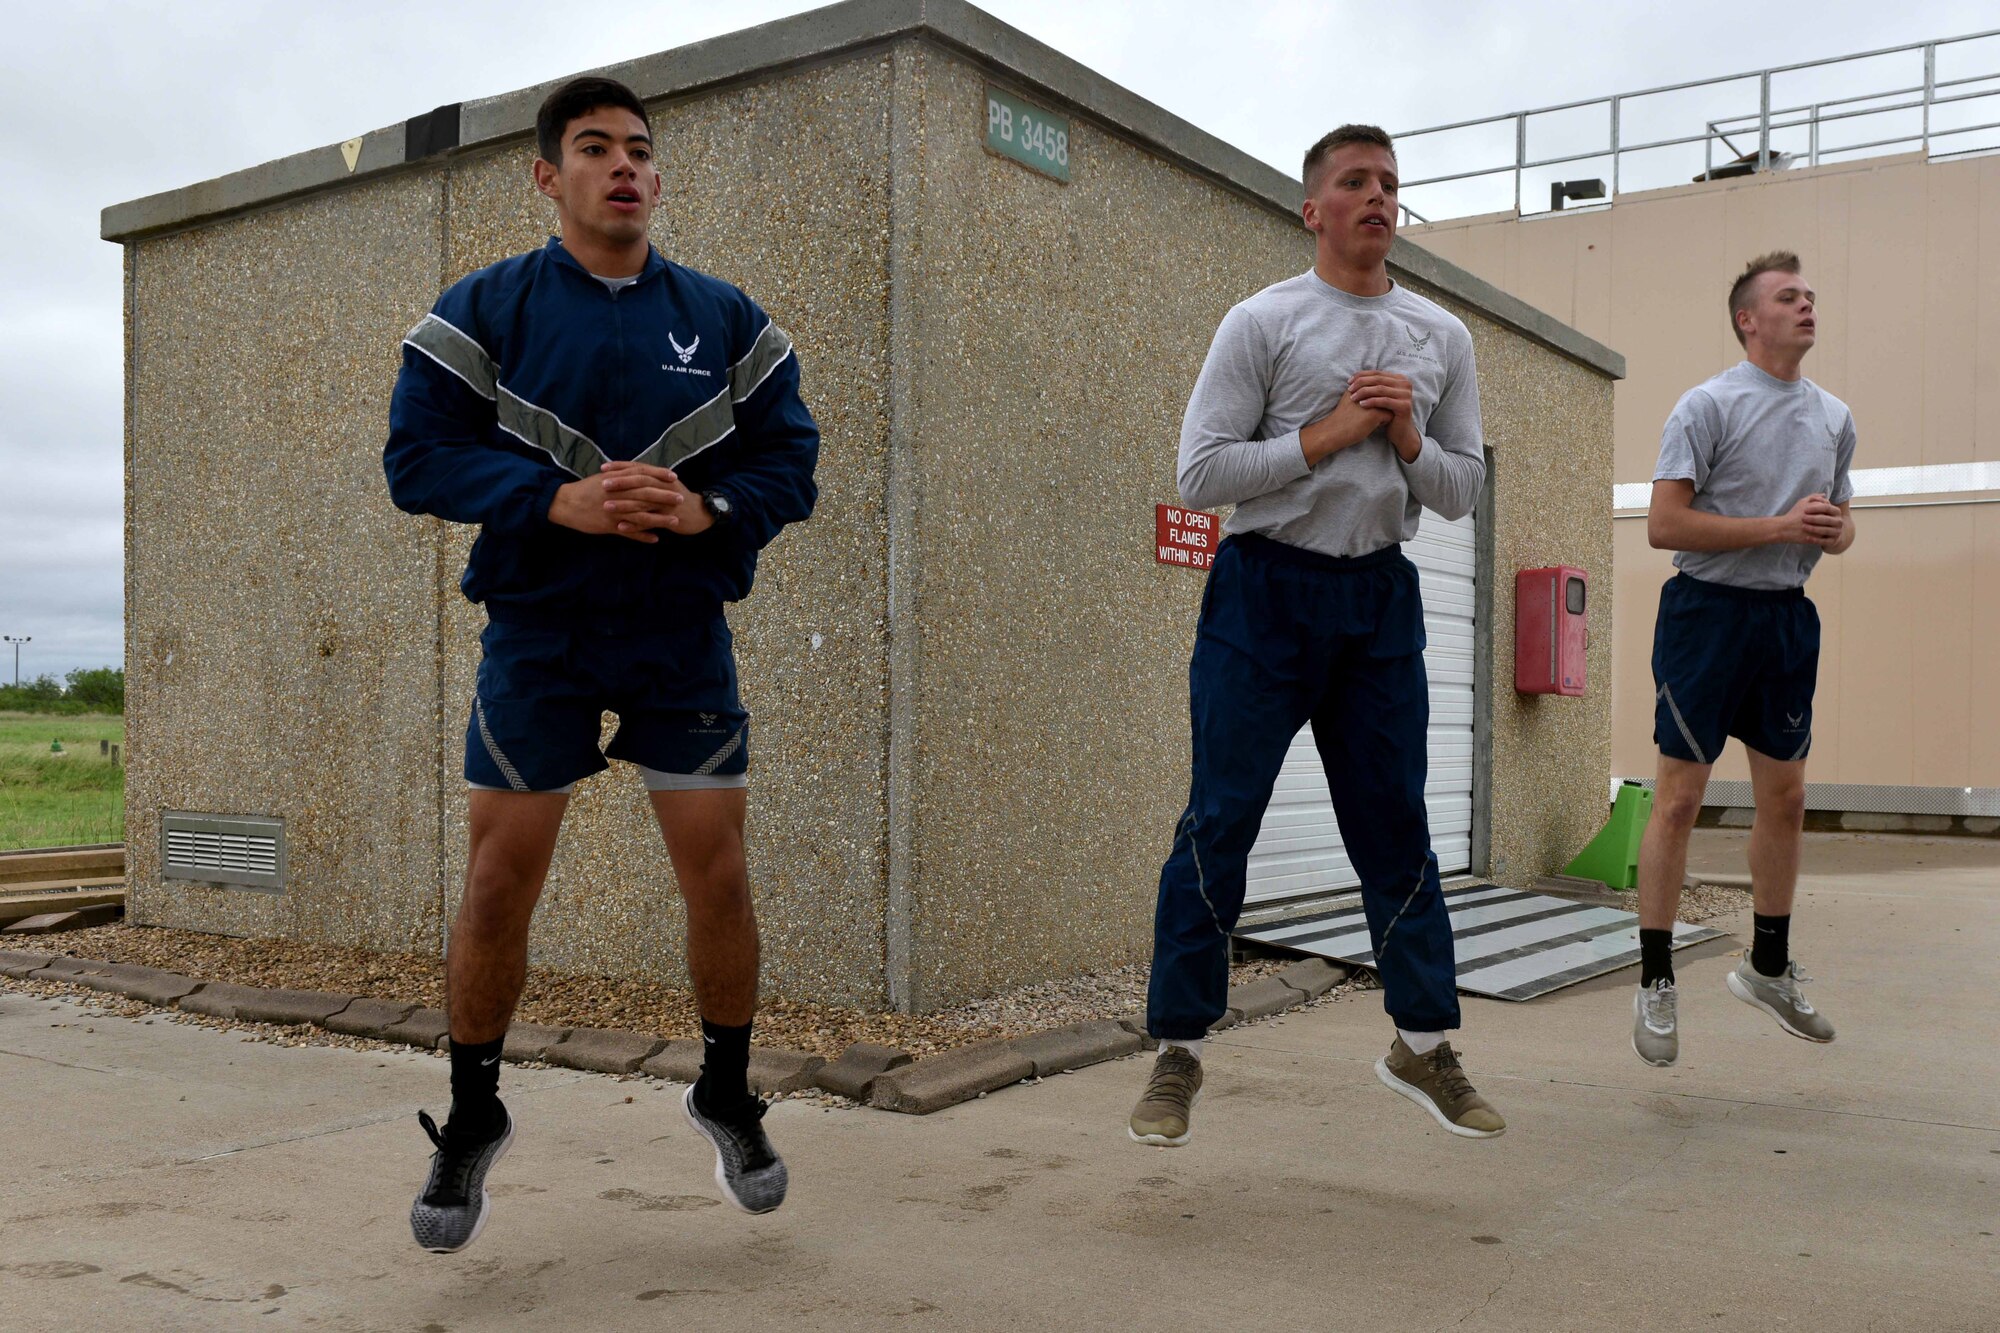 Airman Jake Peterson, Airman 1st Class Garrett Rivett and Airman Haden Stoner, 312th Training Squadron students, perform jump-squats during the Blood, Sweat and Stairs competition at the Louis F. Garland Department of Defense Fire Academy on Goodfellow Air Force Base, Texas, Sept. 22, 2018. Due to poor weather conditions, the coordinators removed the stair-climbing portion from the competition, and participants performed cardio-based exercises instead. (U.S. Air Force photo by Senior Airman Randall Moose/Released)